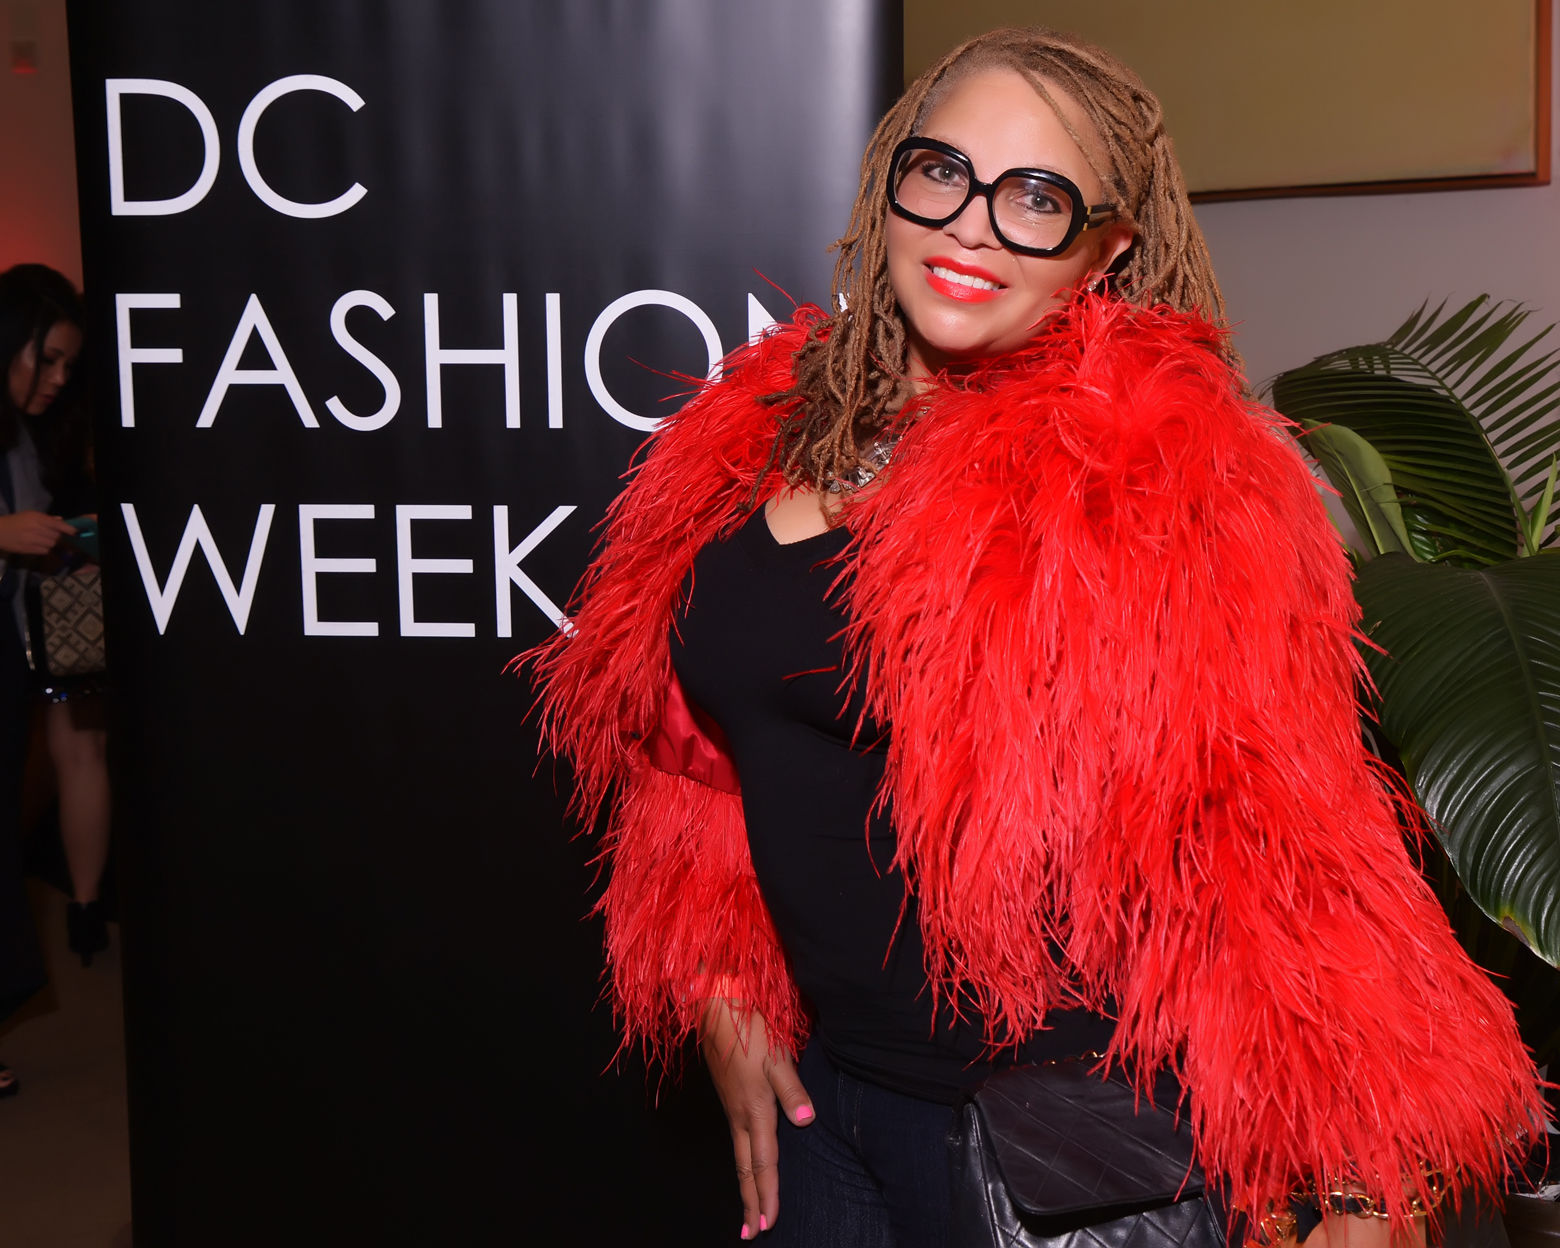 Nicole Peacock of Washington, DC attends the DC Fashion Week International Couture Collections runway show at the Embassy of France on Sunday, September 23, 2018